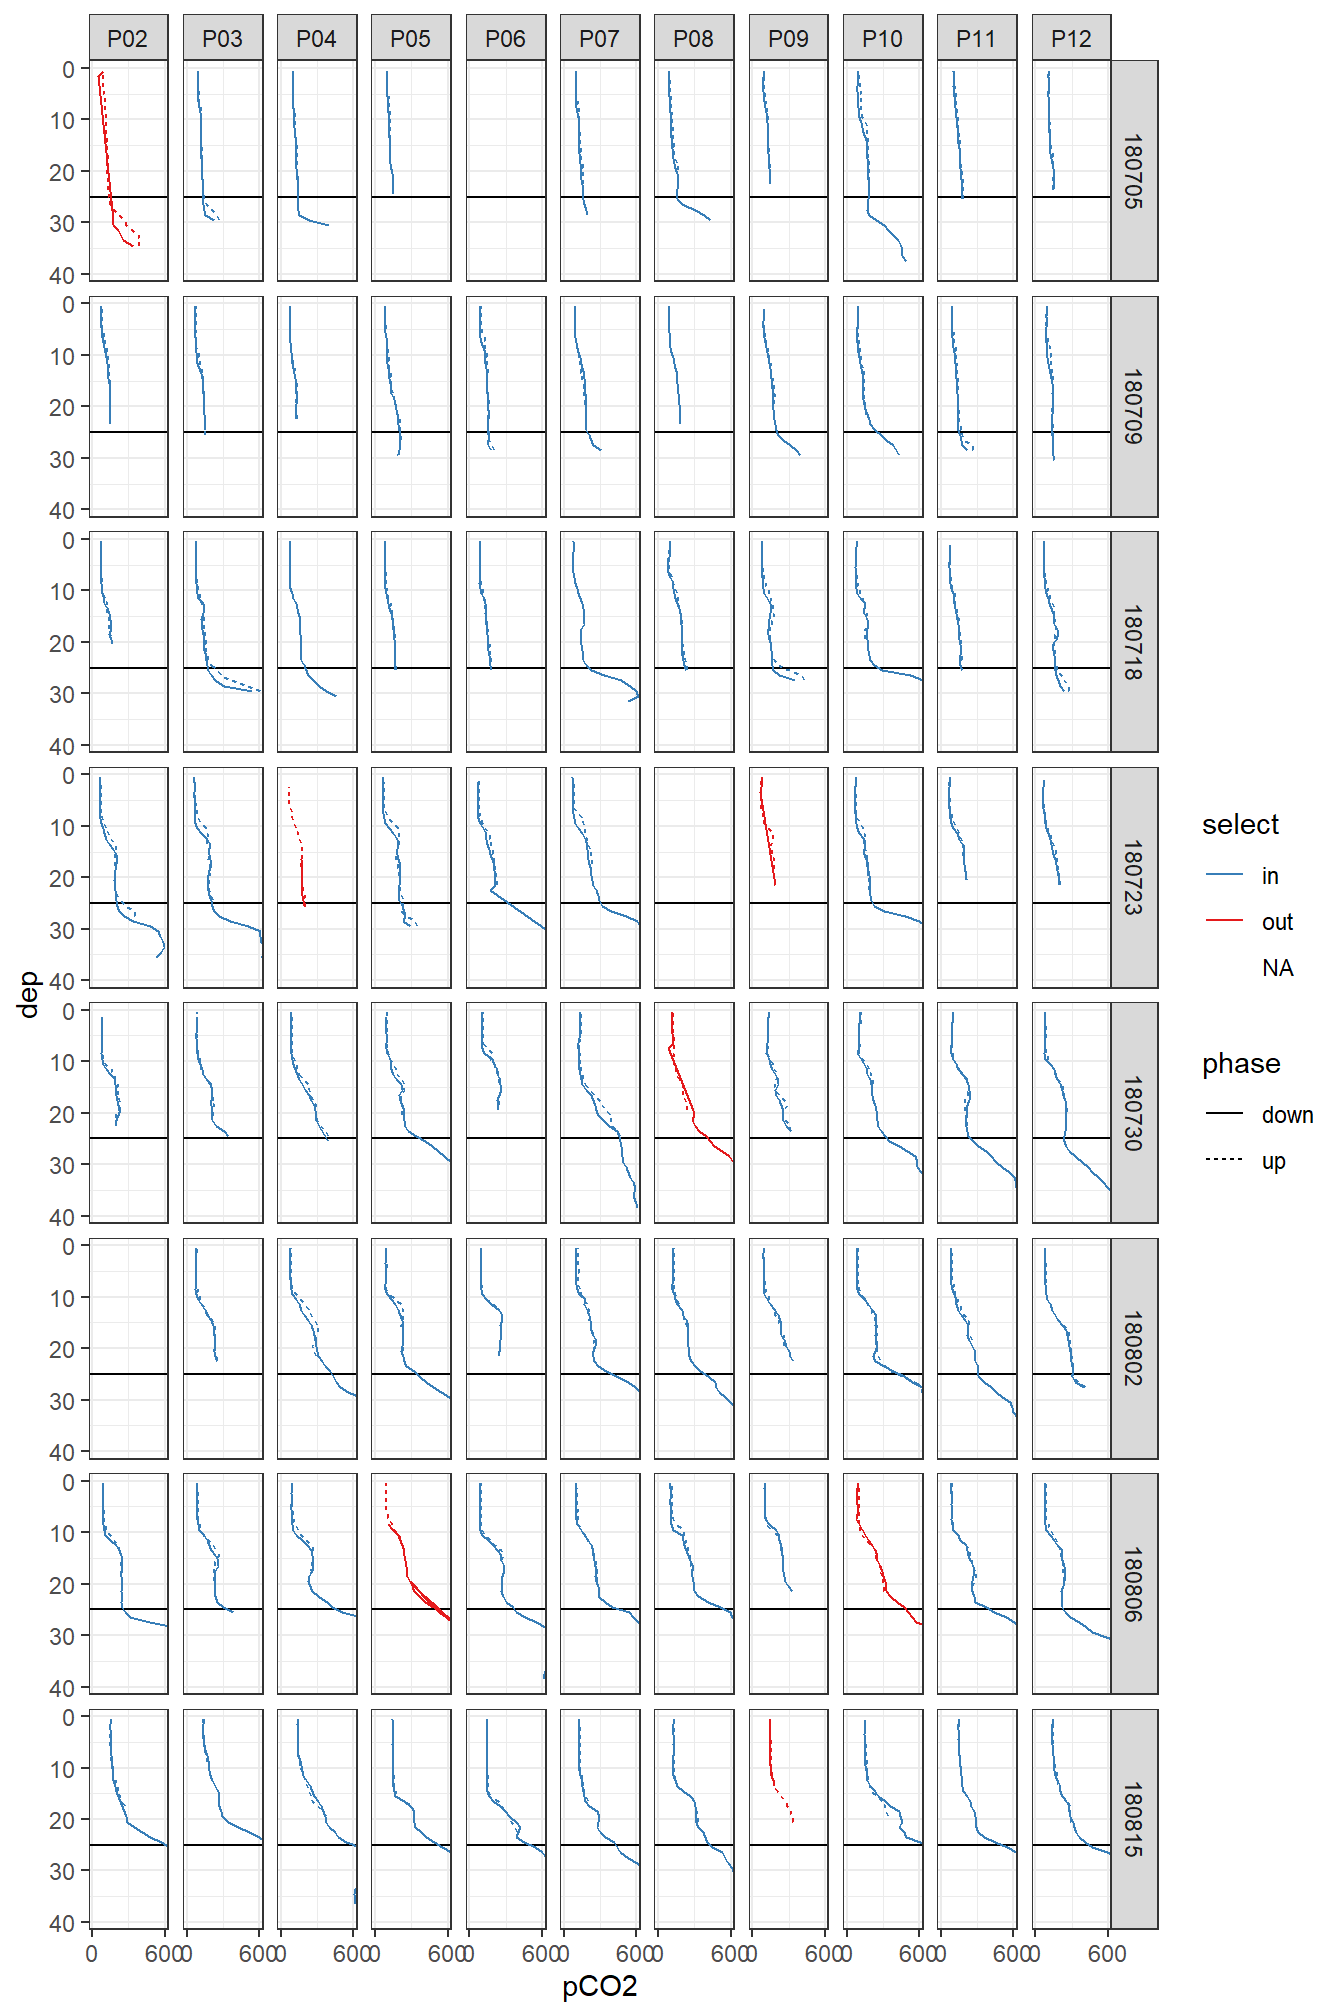 Overview pCO~2~ profiles at stations (P02-P12) and cruise dates (ID). y-axis restricted to displayed range.